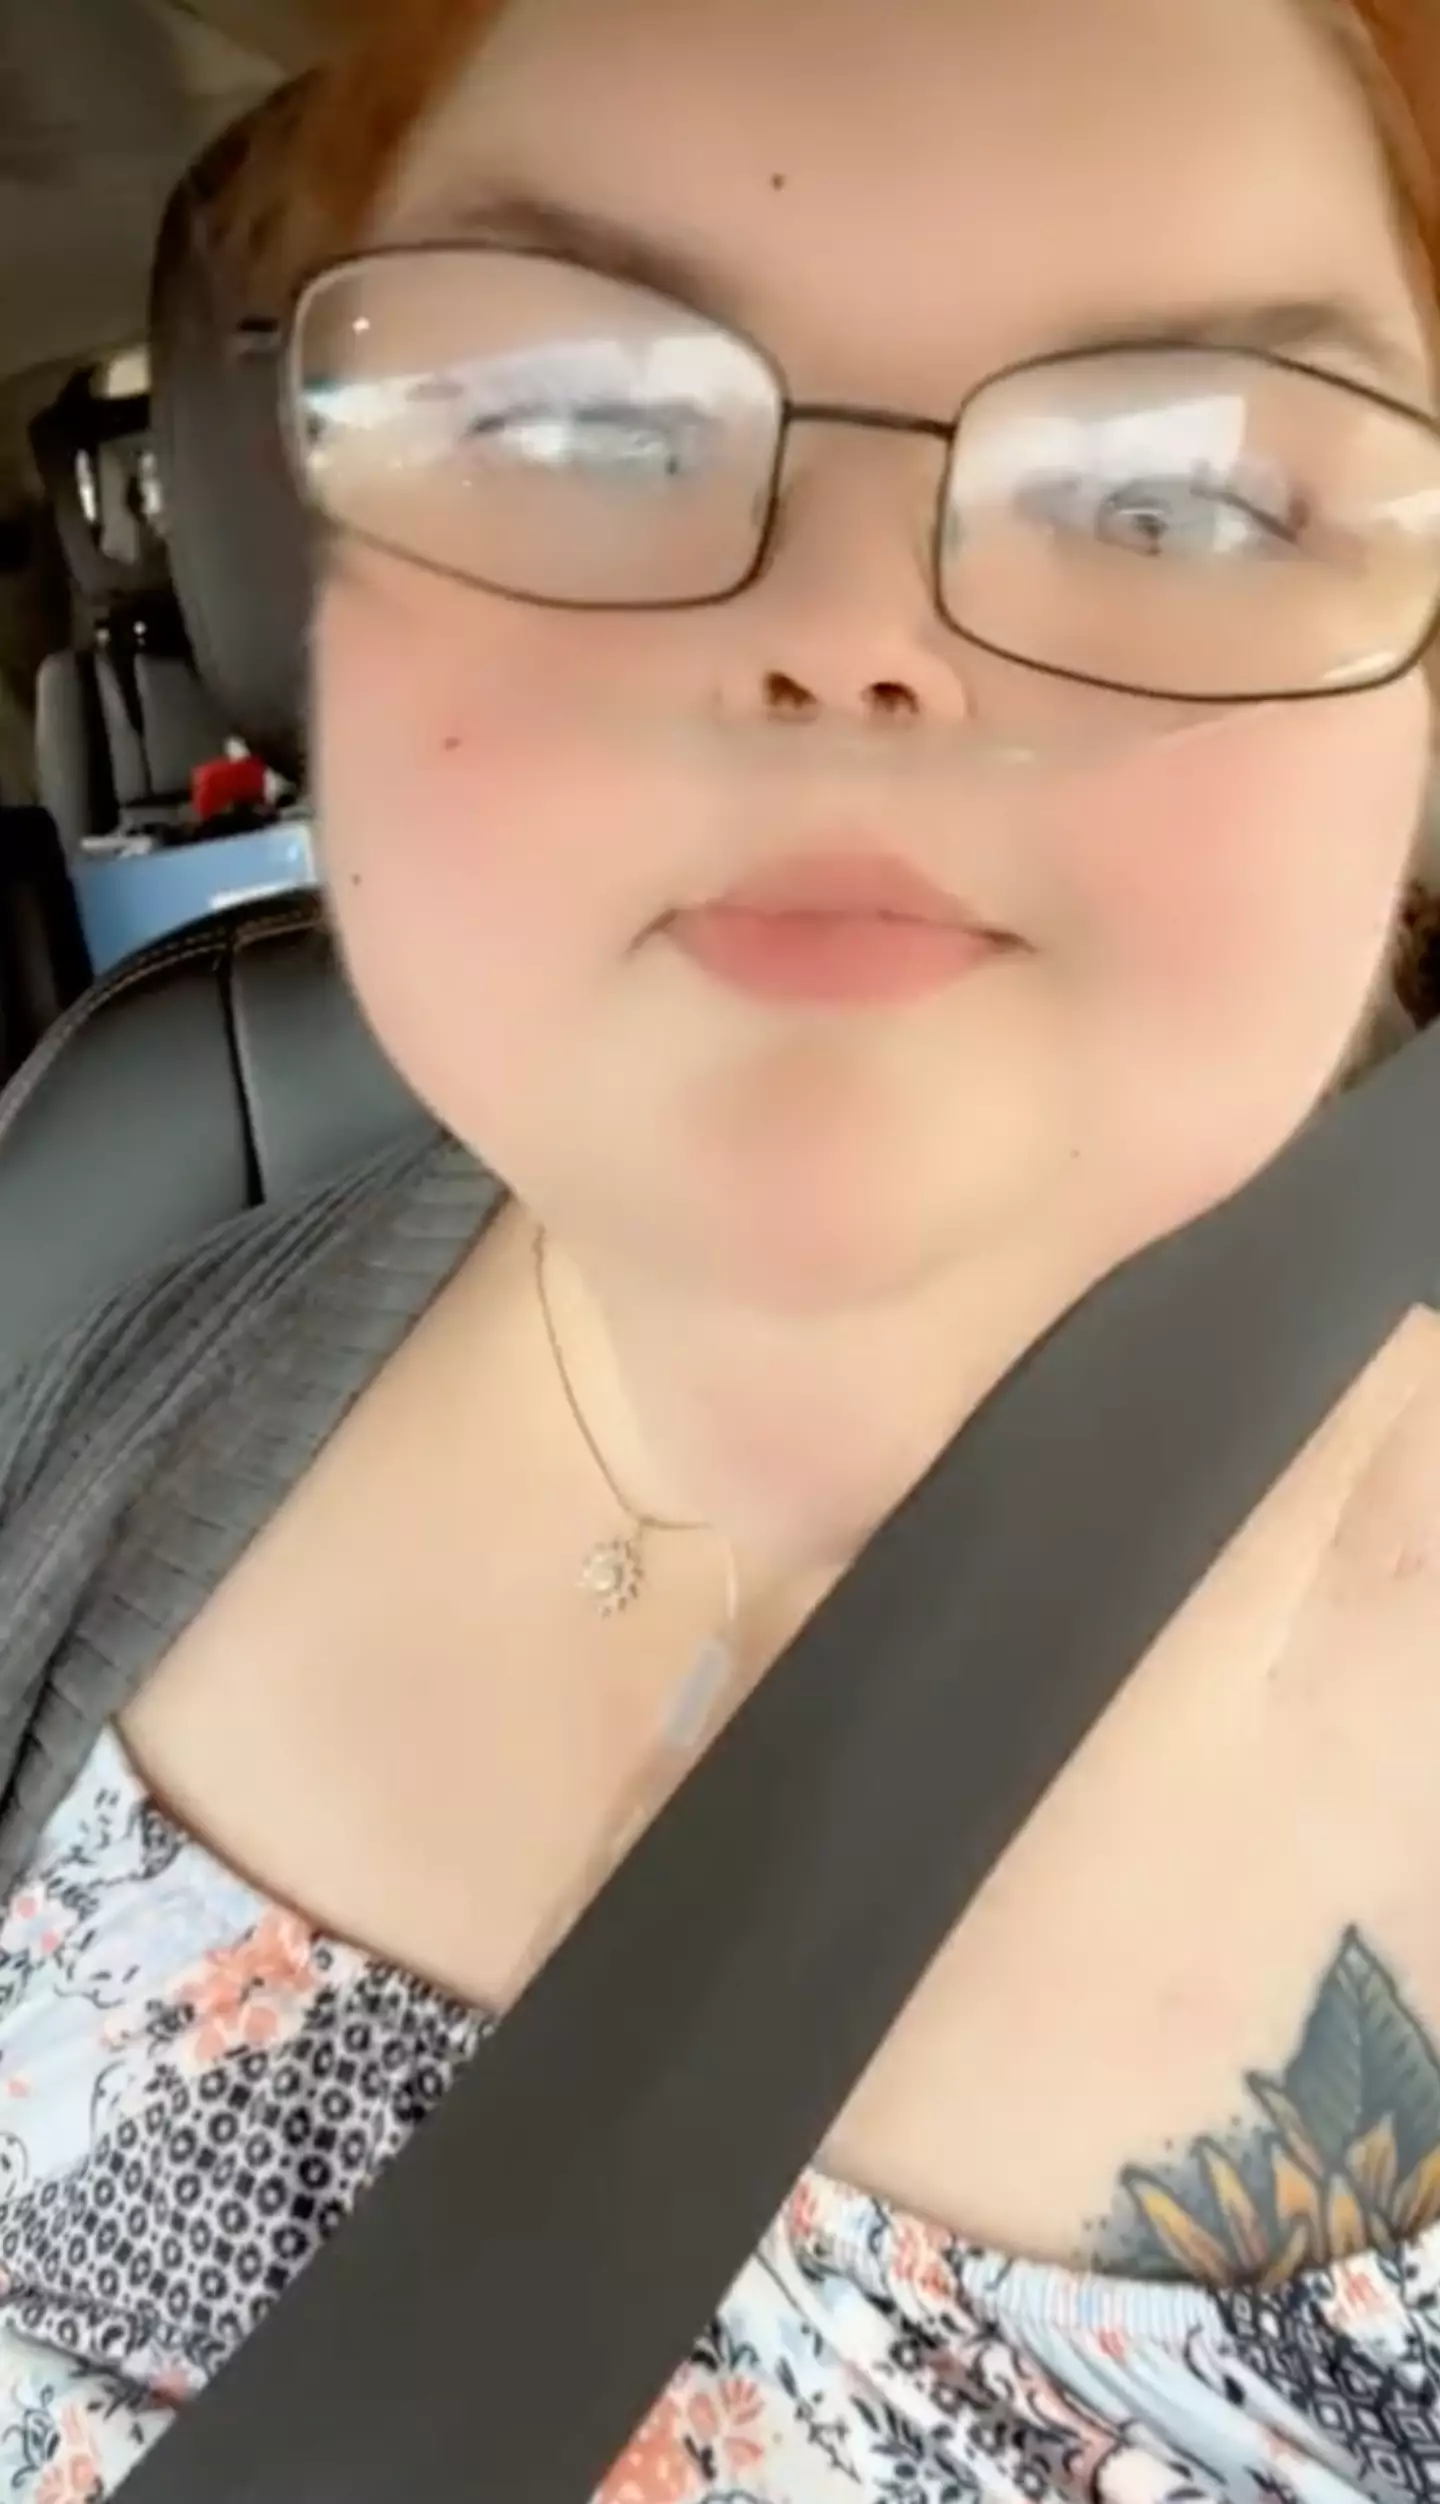 Tammy shared a clip of herself sat in a car.